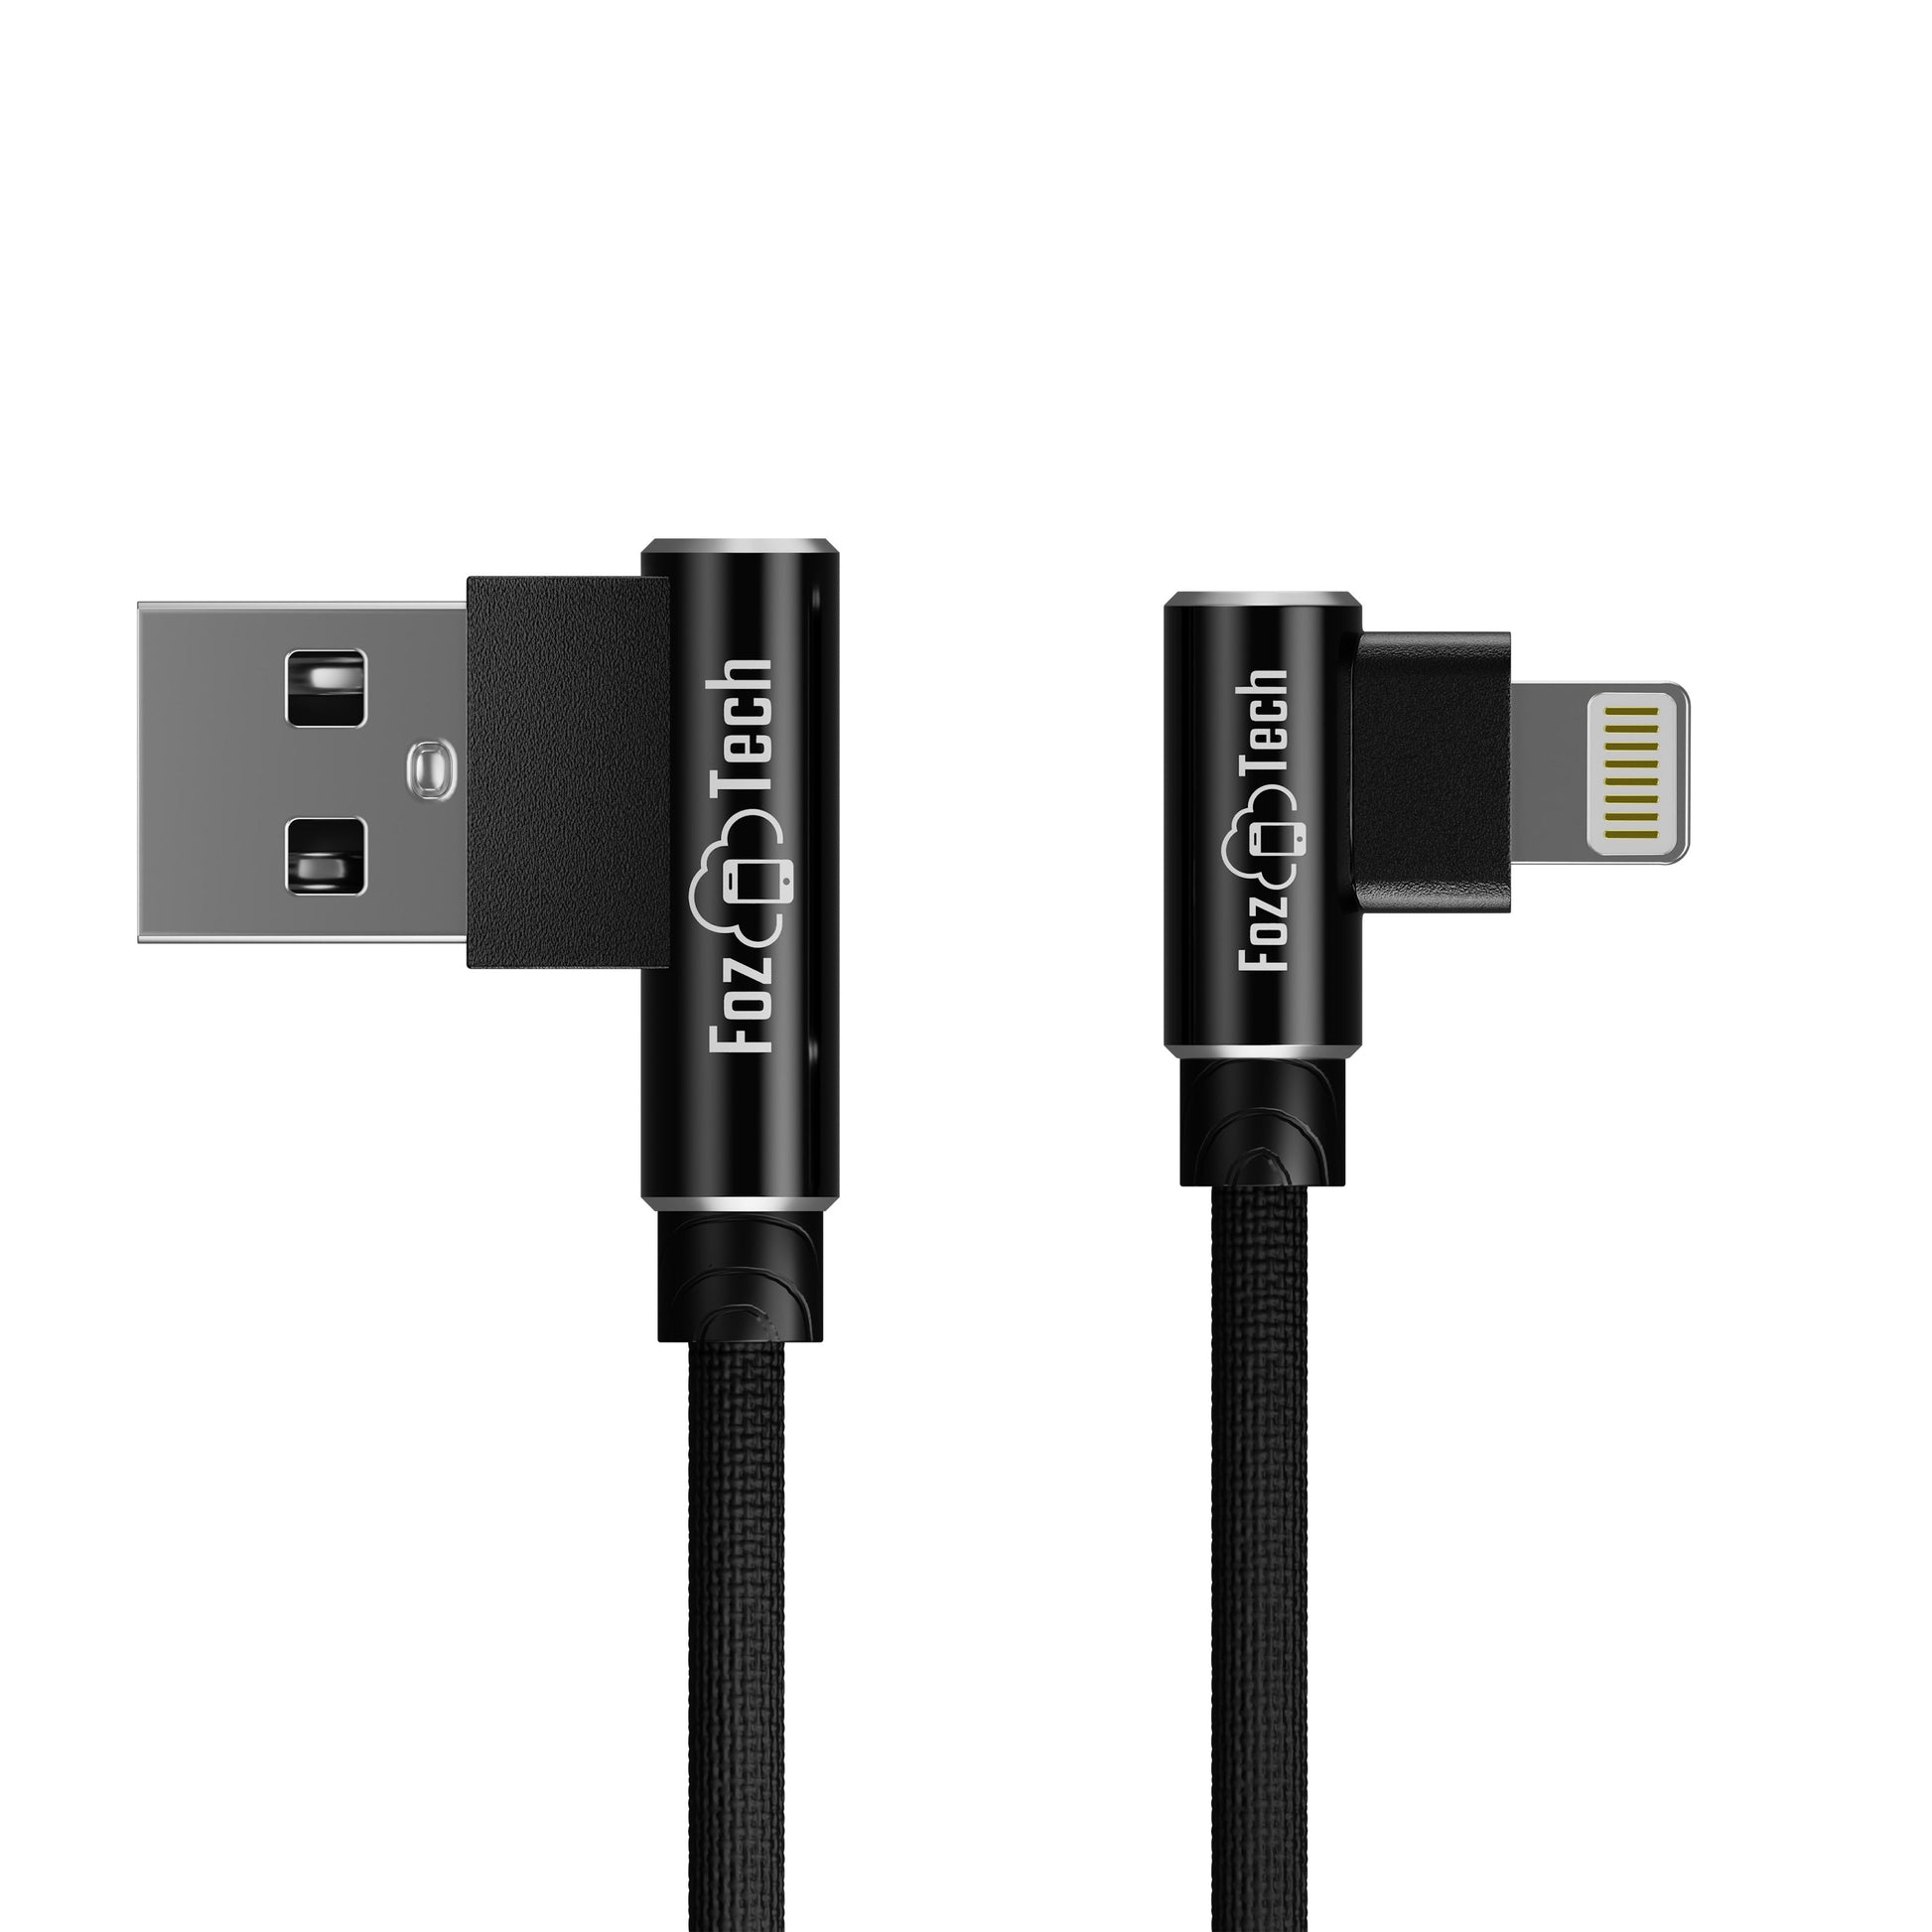 FozTech - Angled Series - Angled USB Charger Cable Data Sync Lead for iPhone, iPad, iPod - Black - USB Cable - FozTech